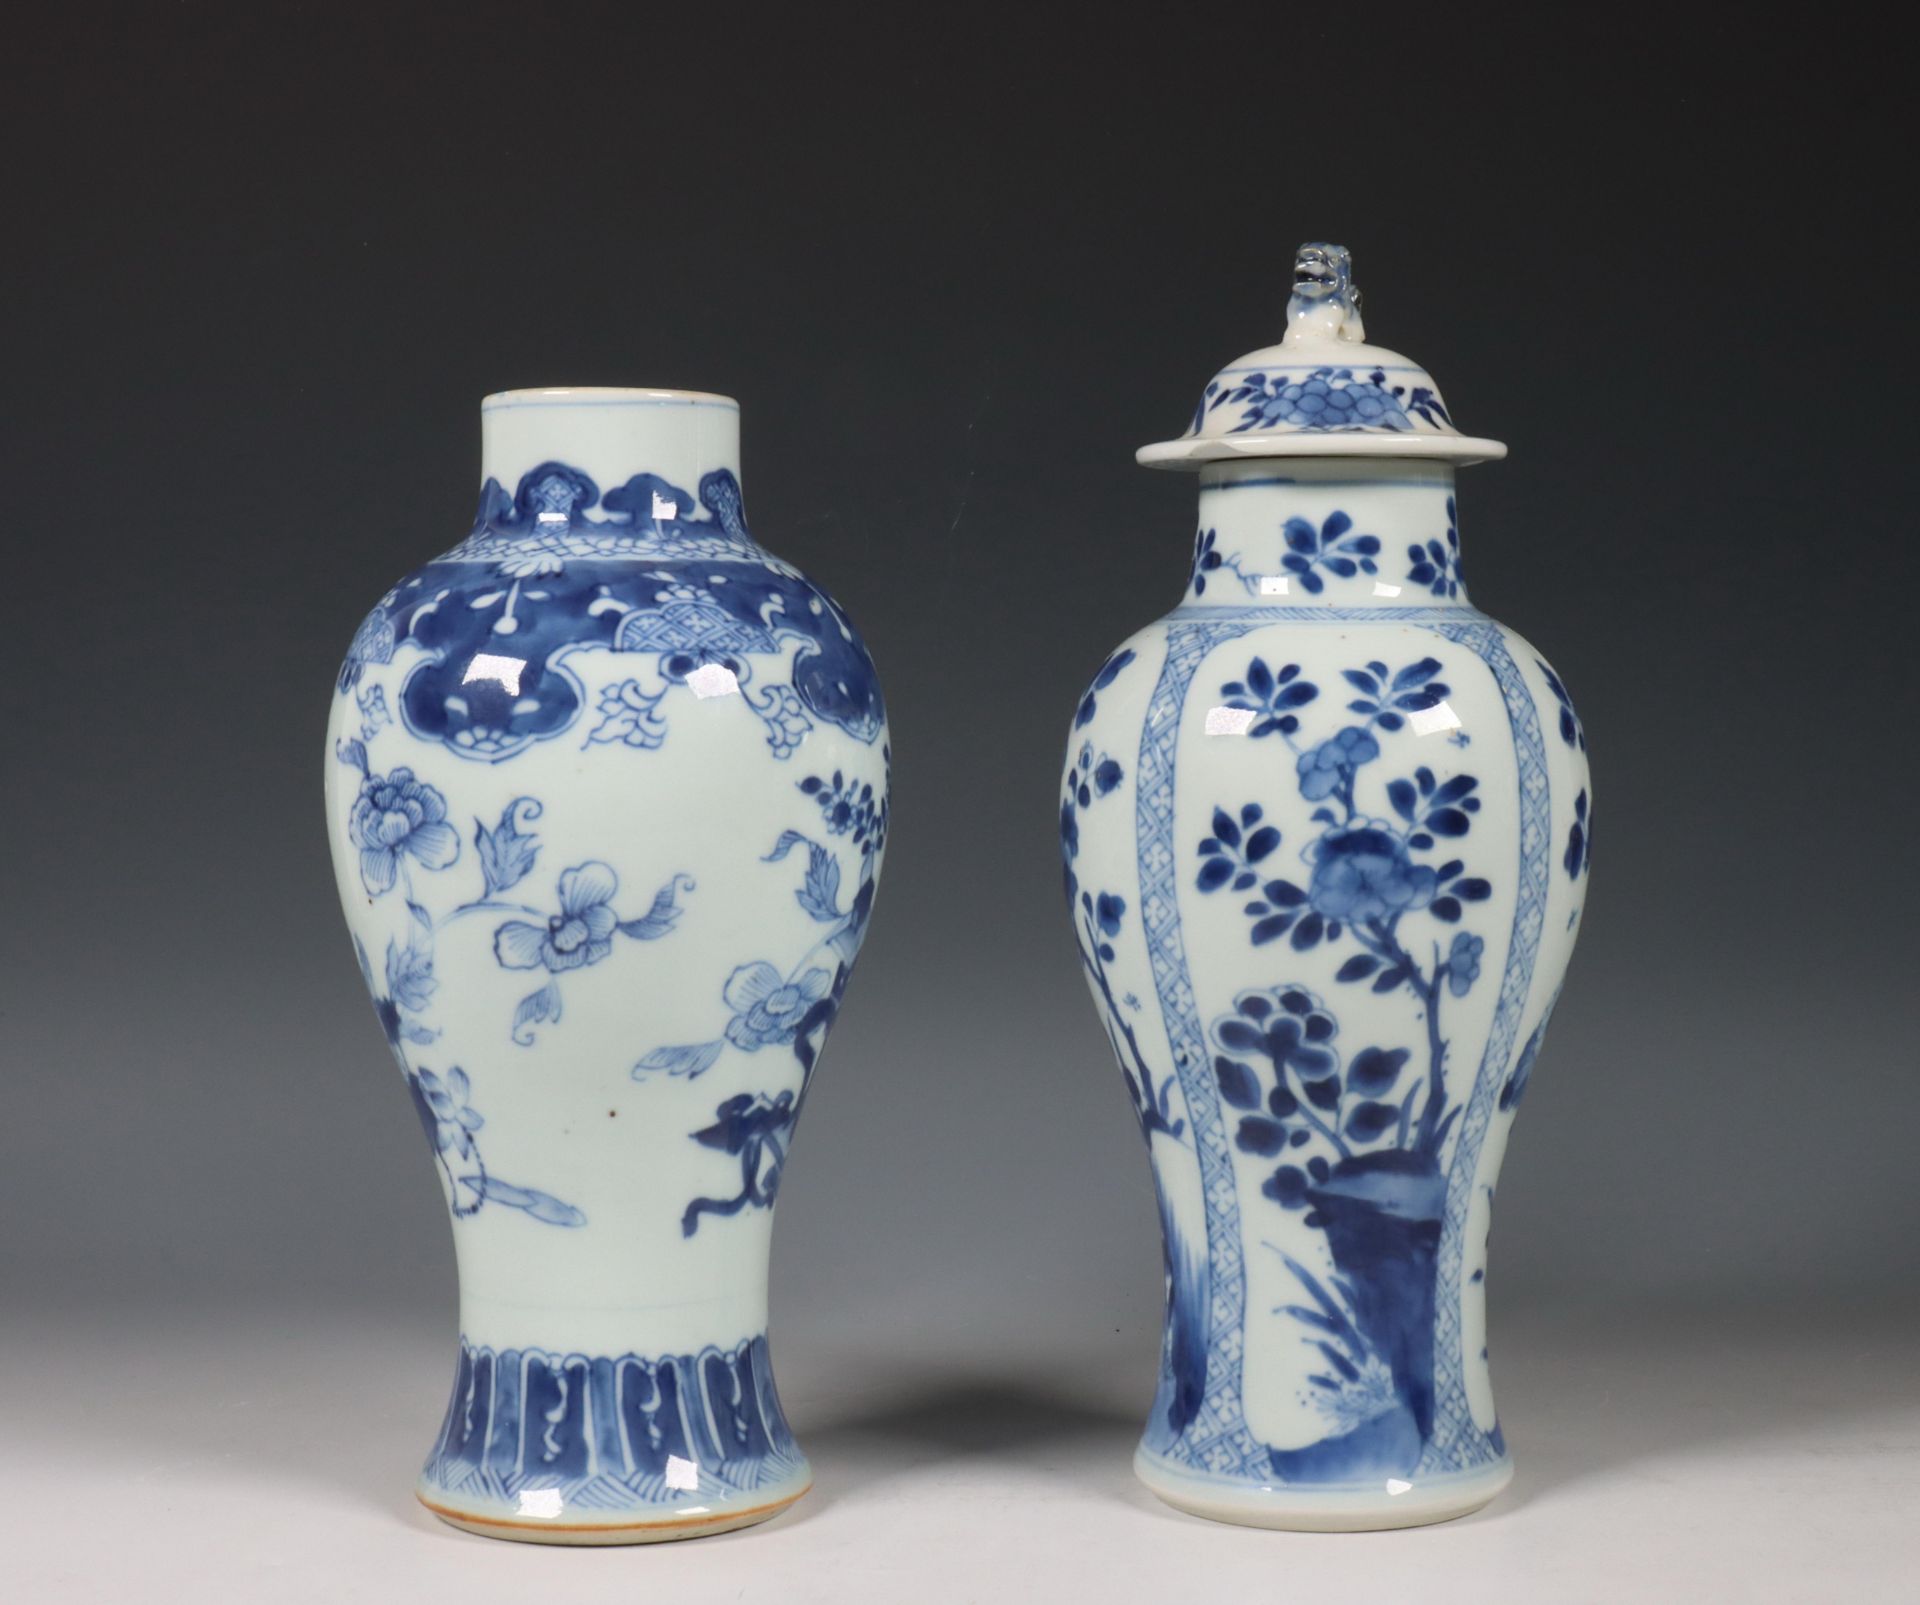 China, two blue and white porcelain baluster vases, Qianlong period (1736-1795), - Image 3 of 6